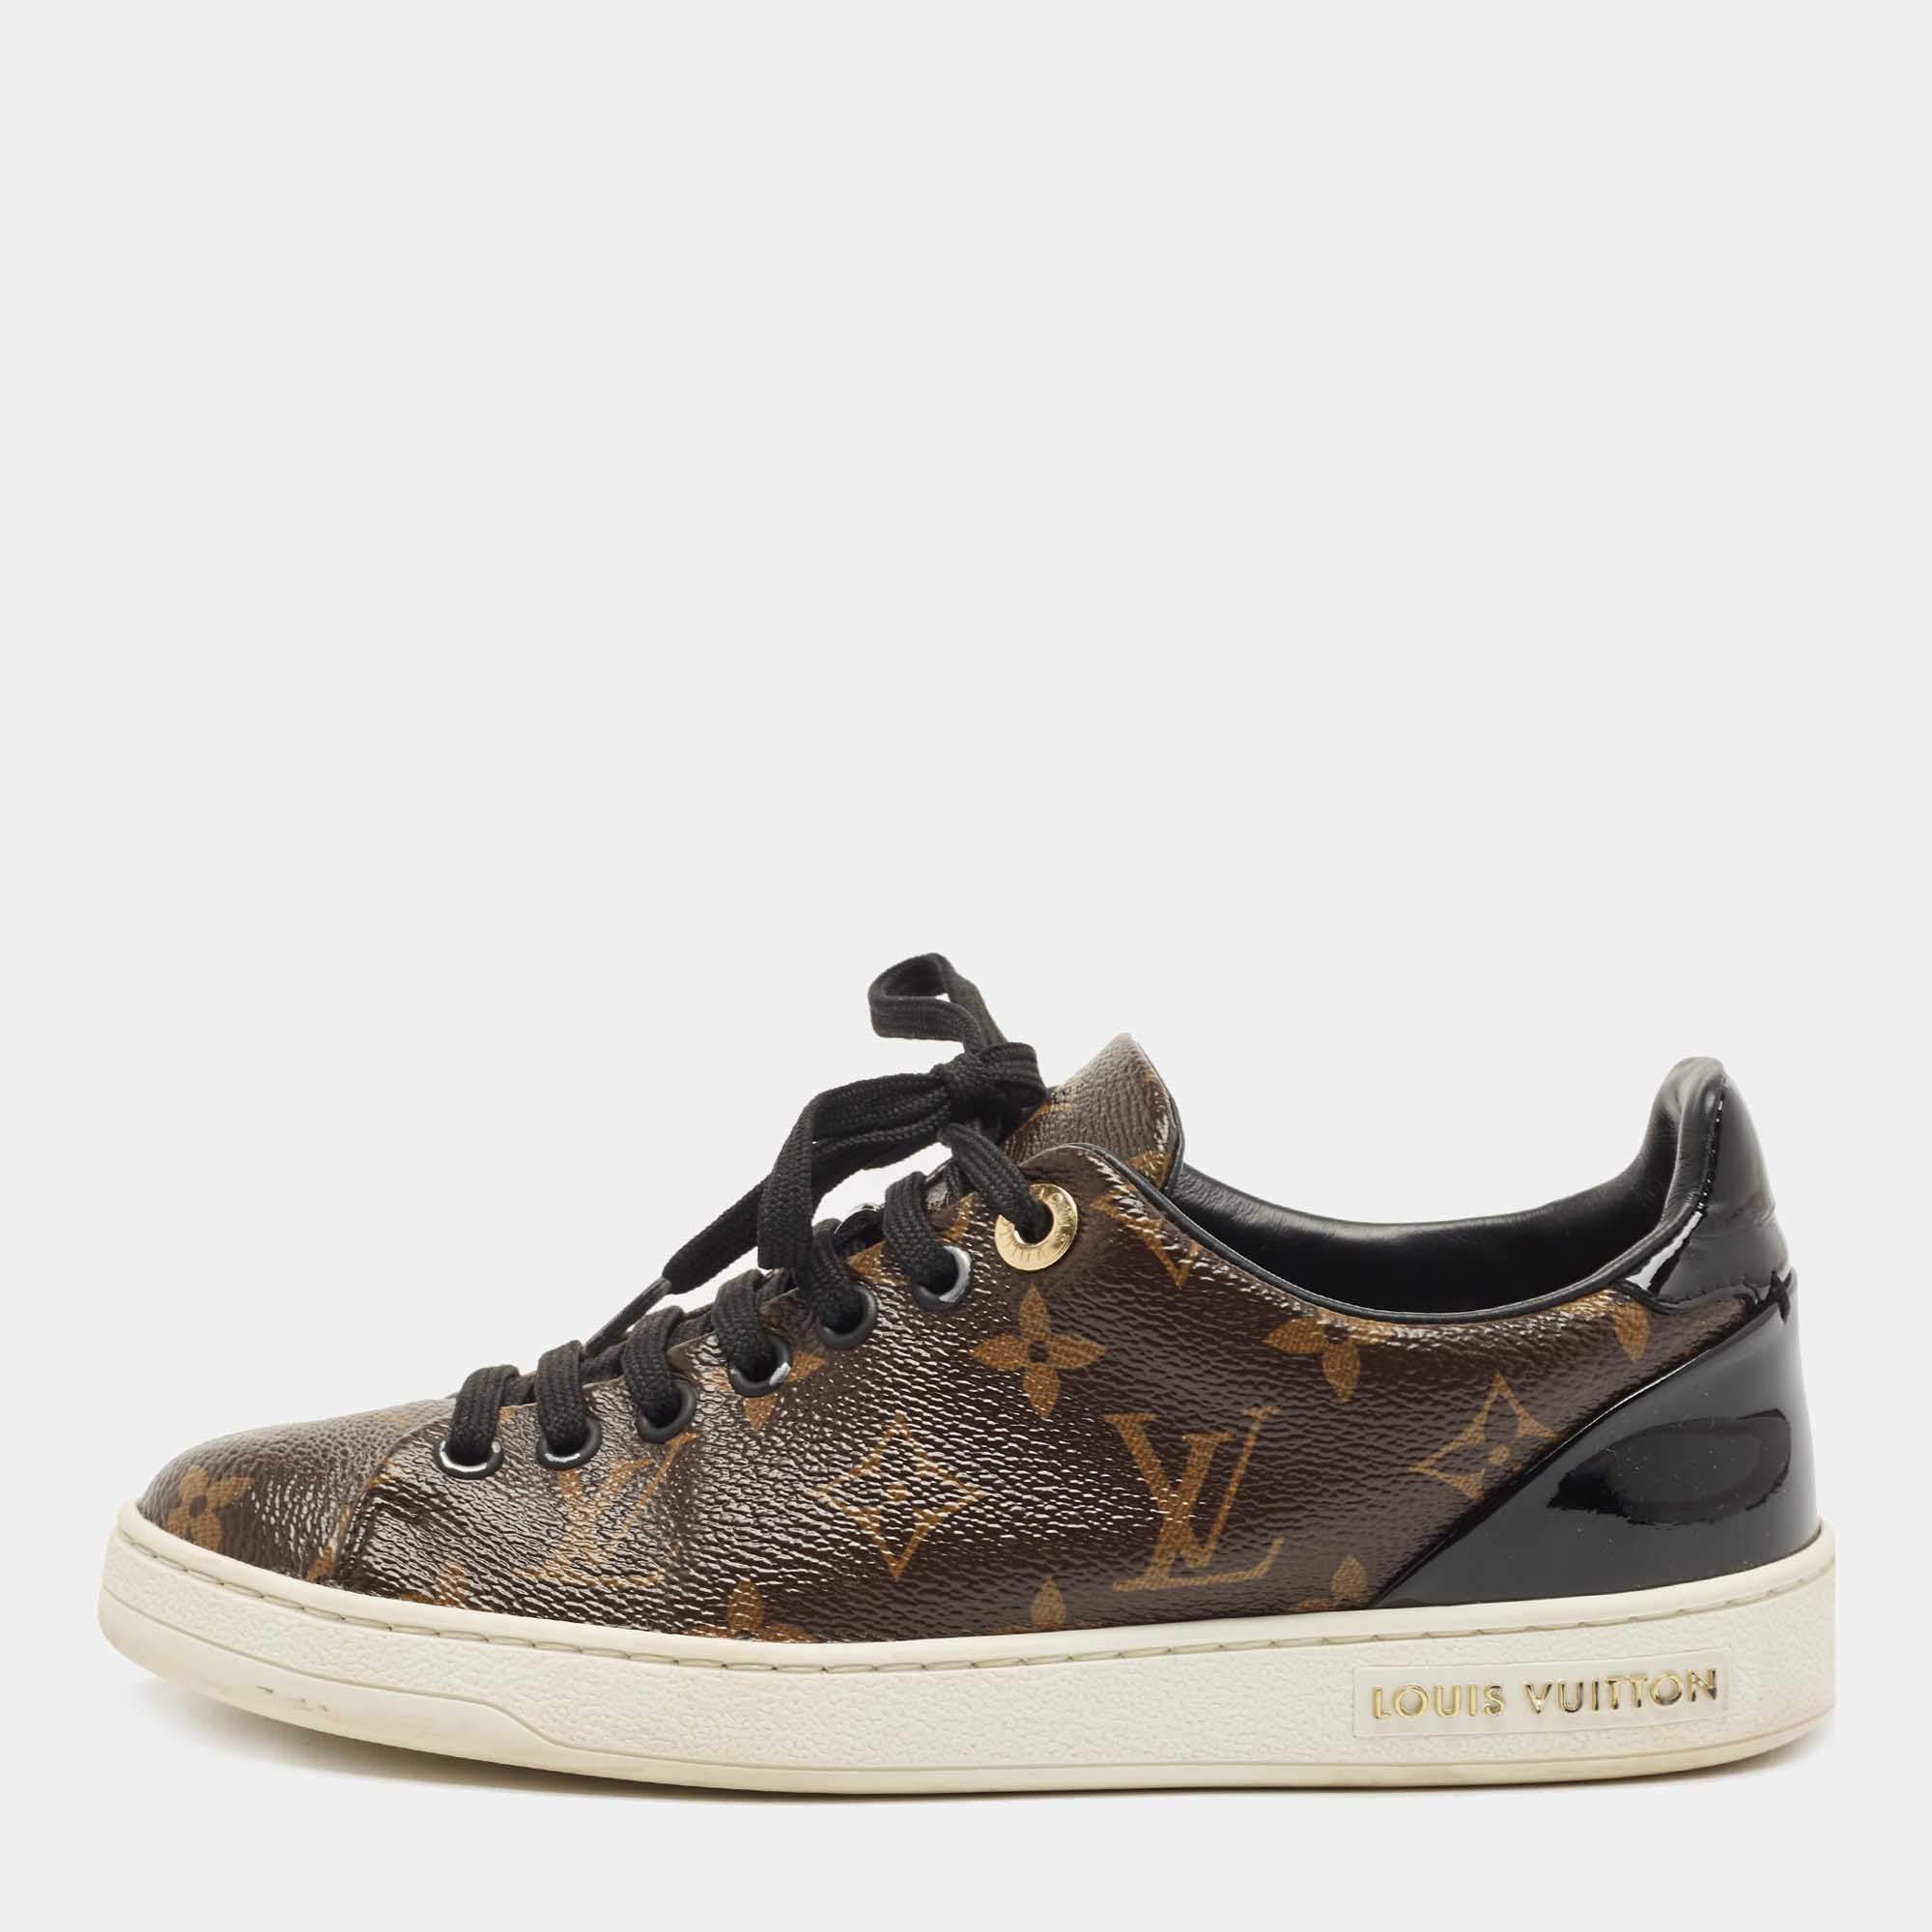 Louis Vuitton Brown/Black Monogram Canvas and Patent Leather Frontrow Sneakers Size 35